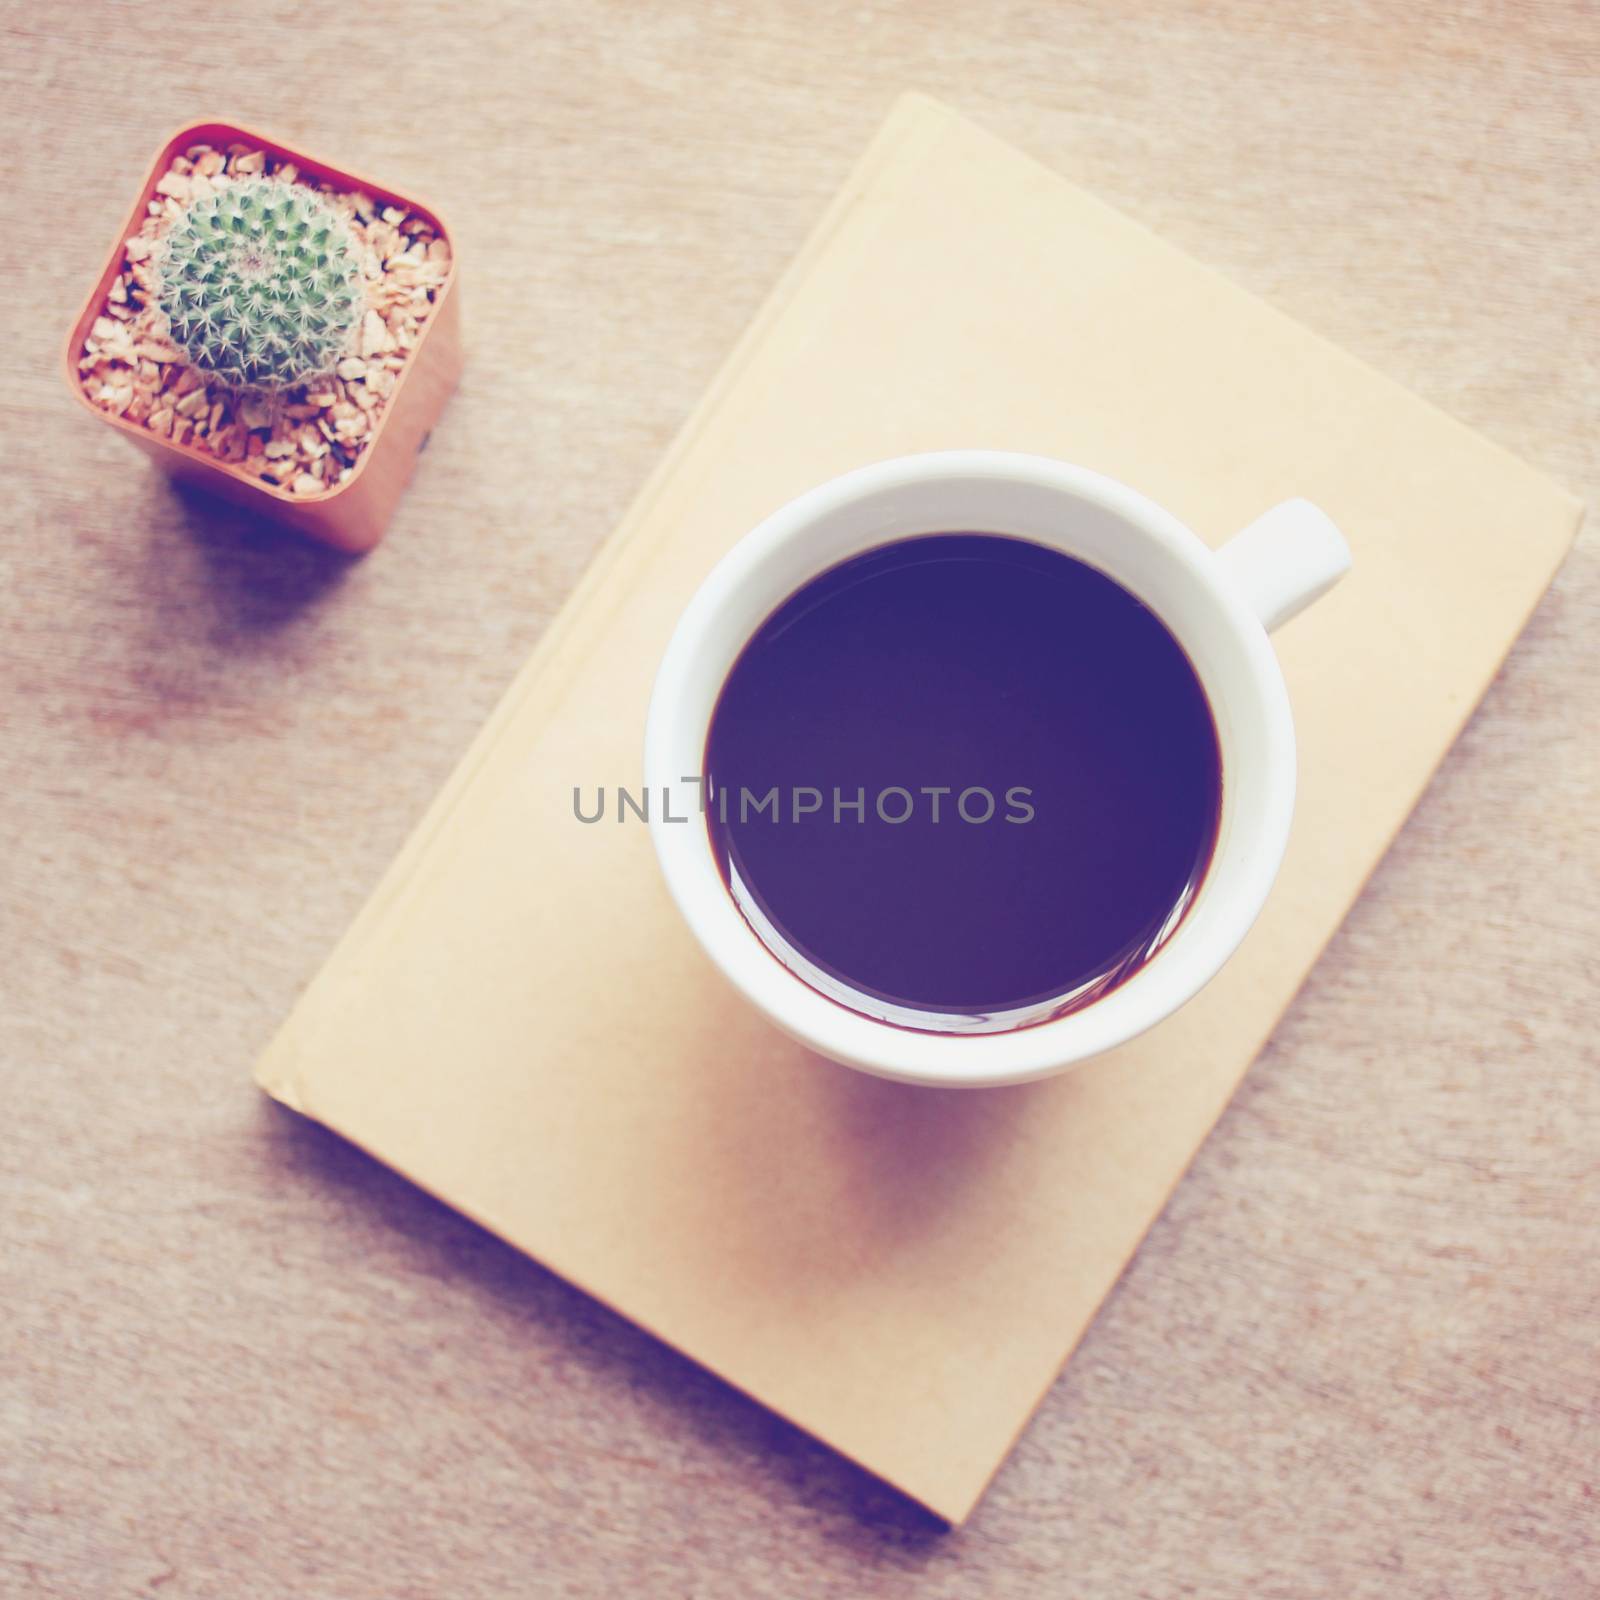 Black coffee on notebook and cactus with retro filter effect